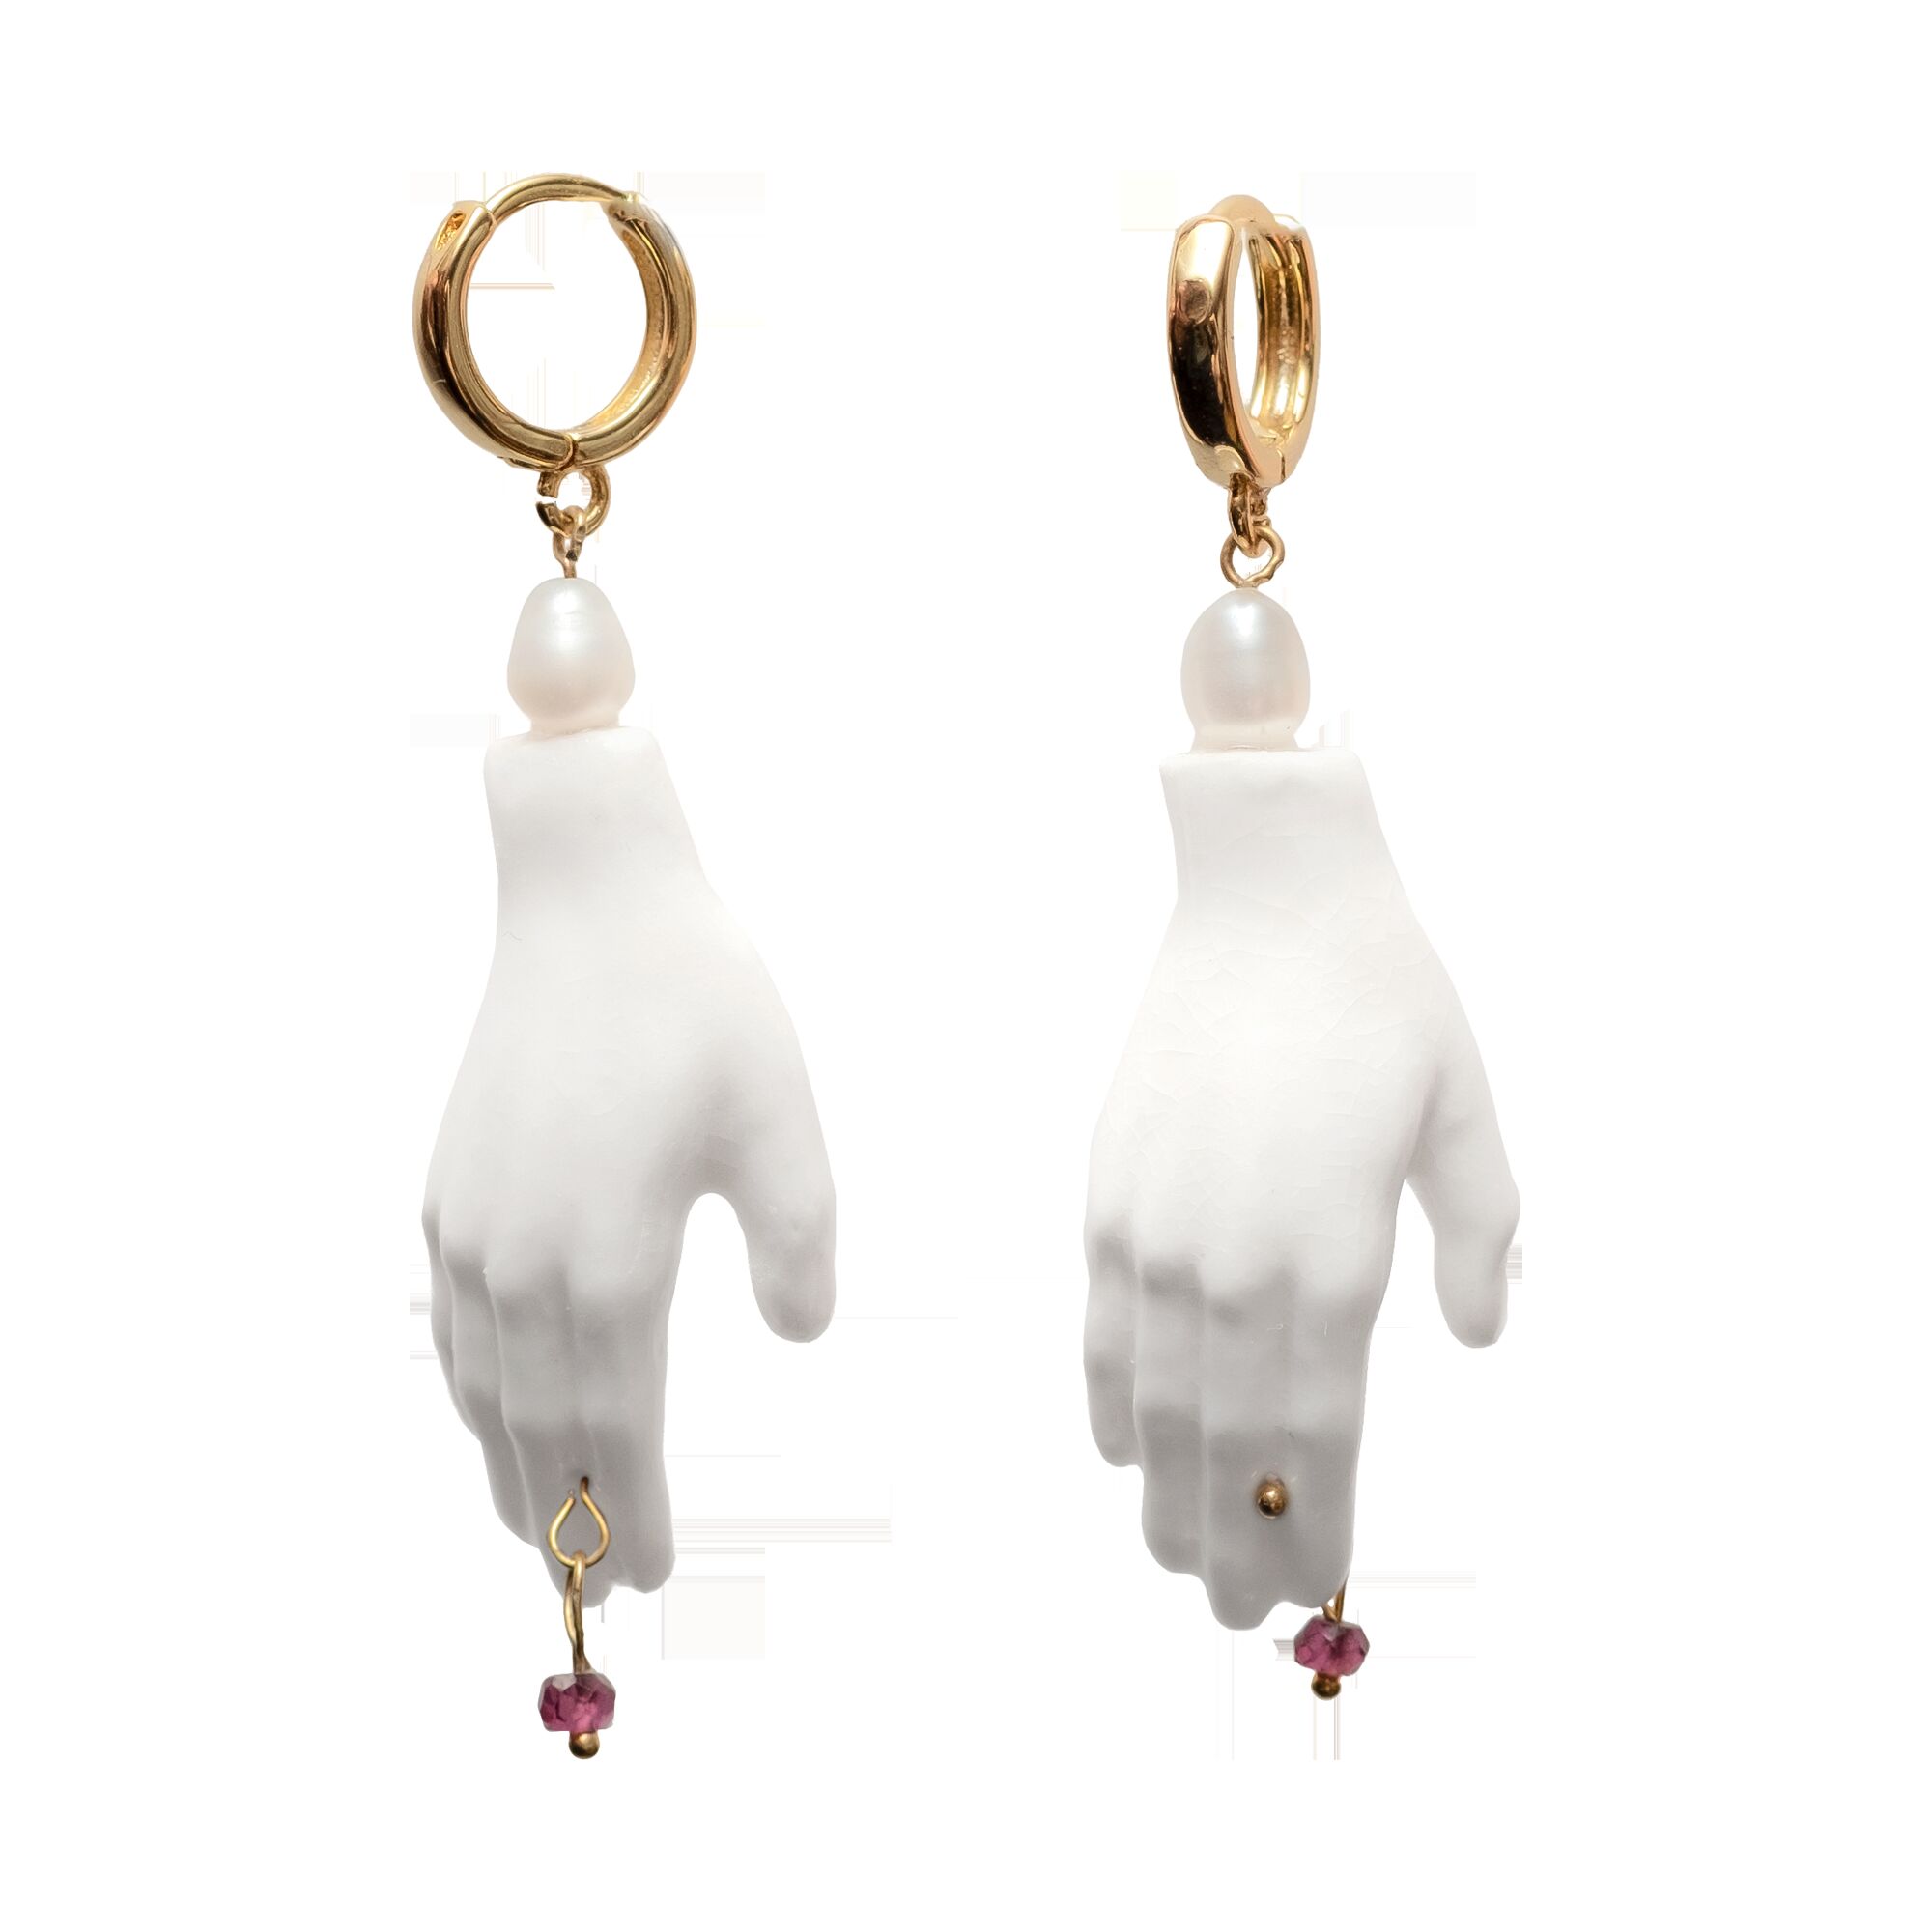 Porcelain hand earrings with garnet and faux pearls